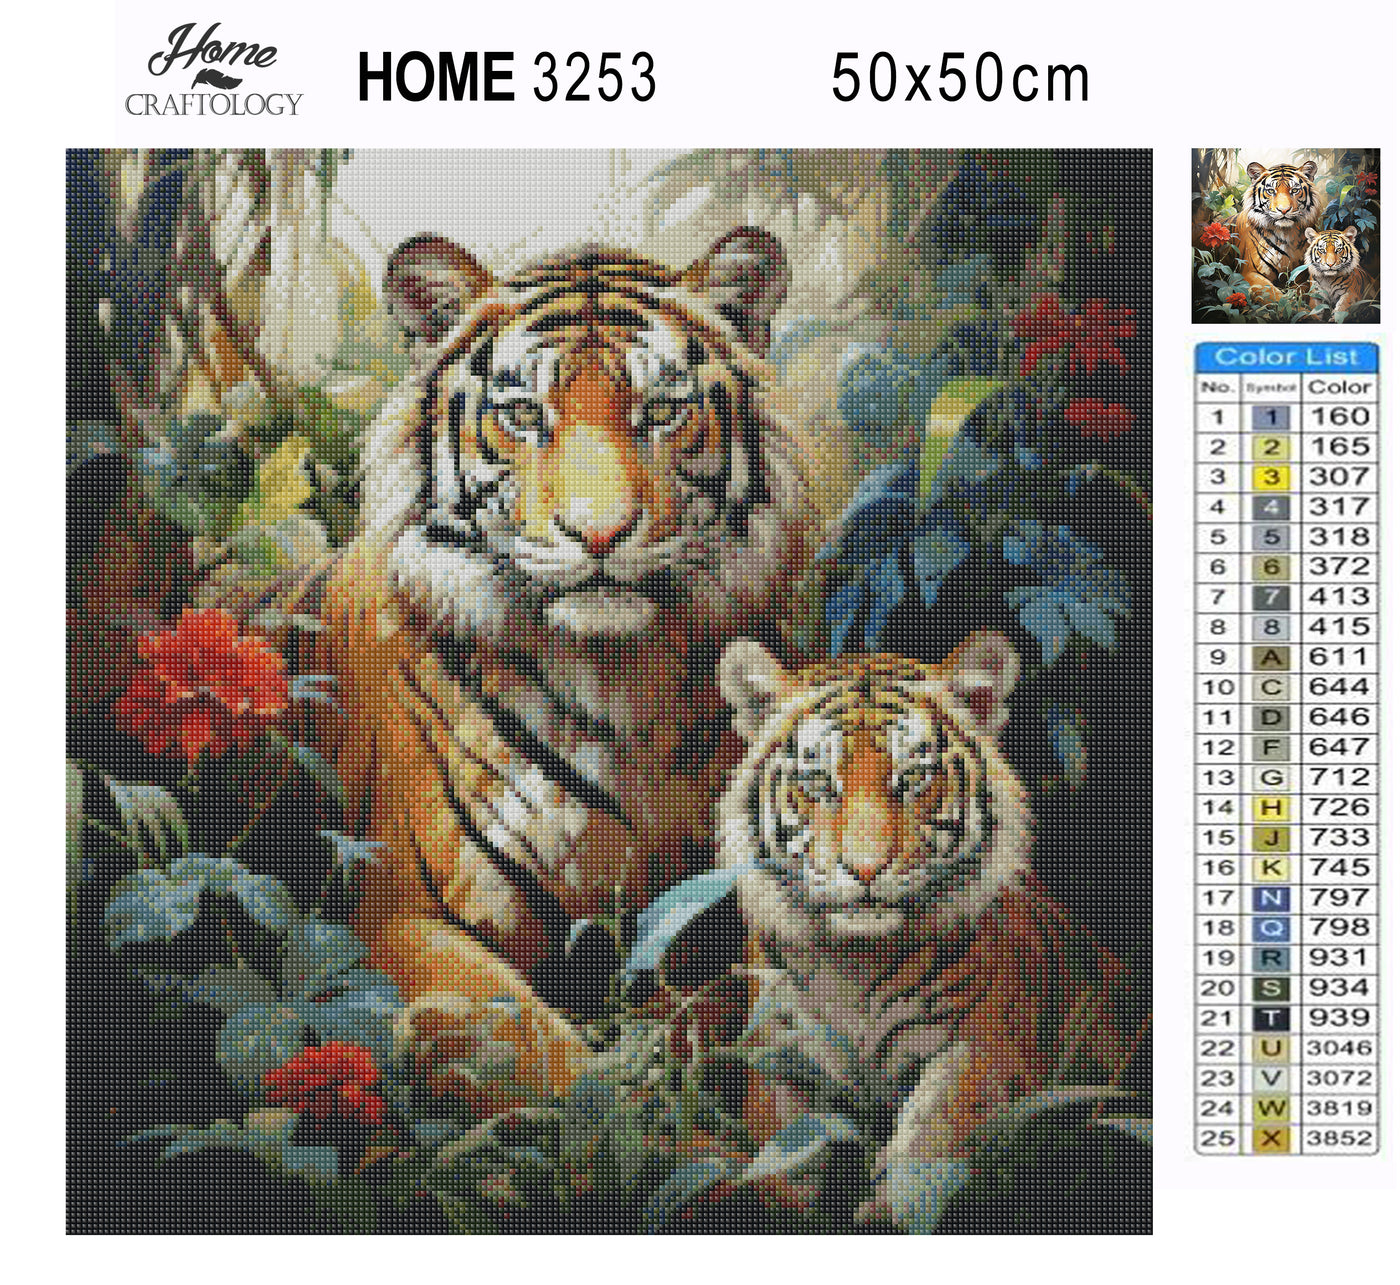 Tigers in the Forest - Premium Diamond Painting Kit